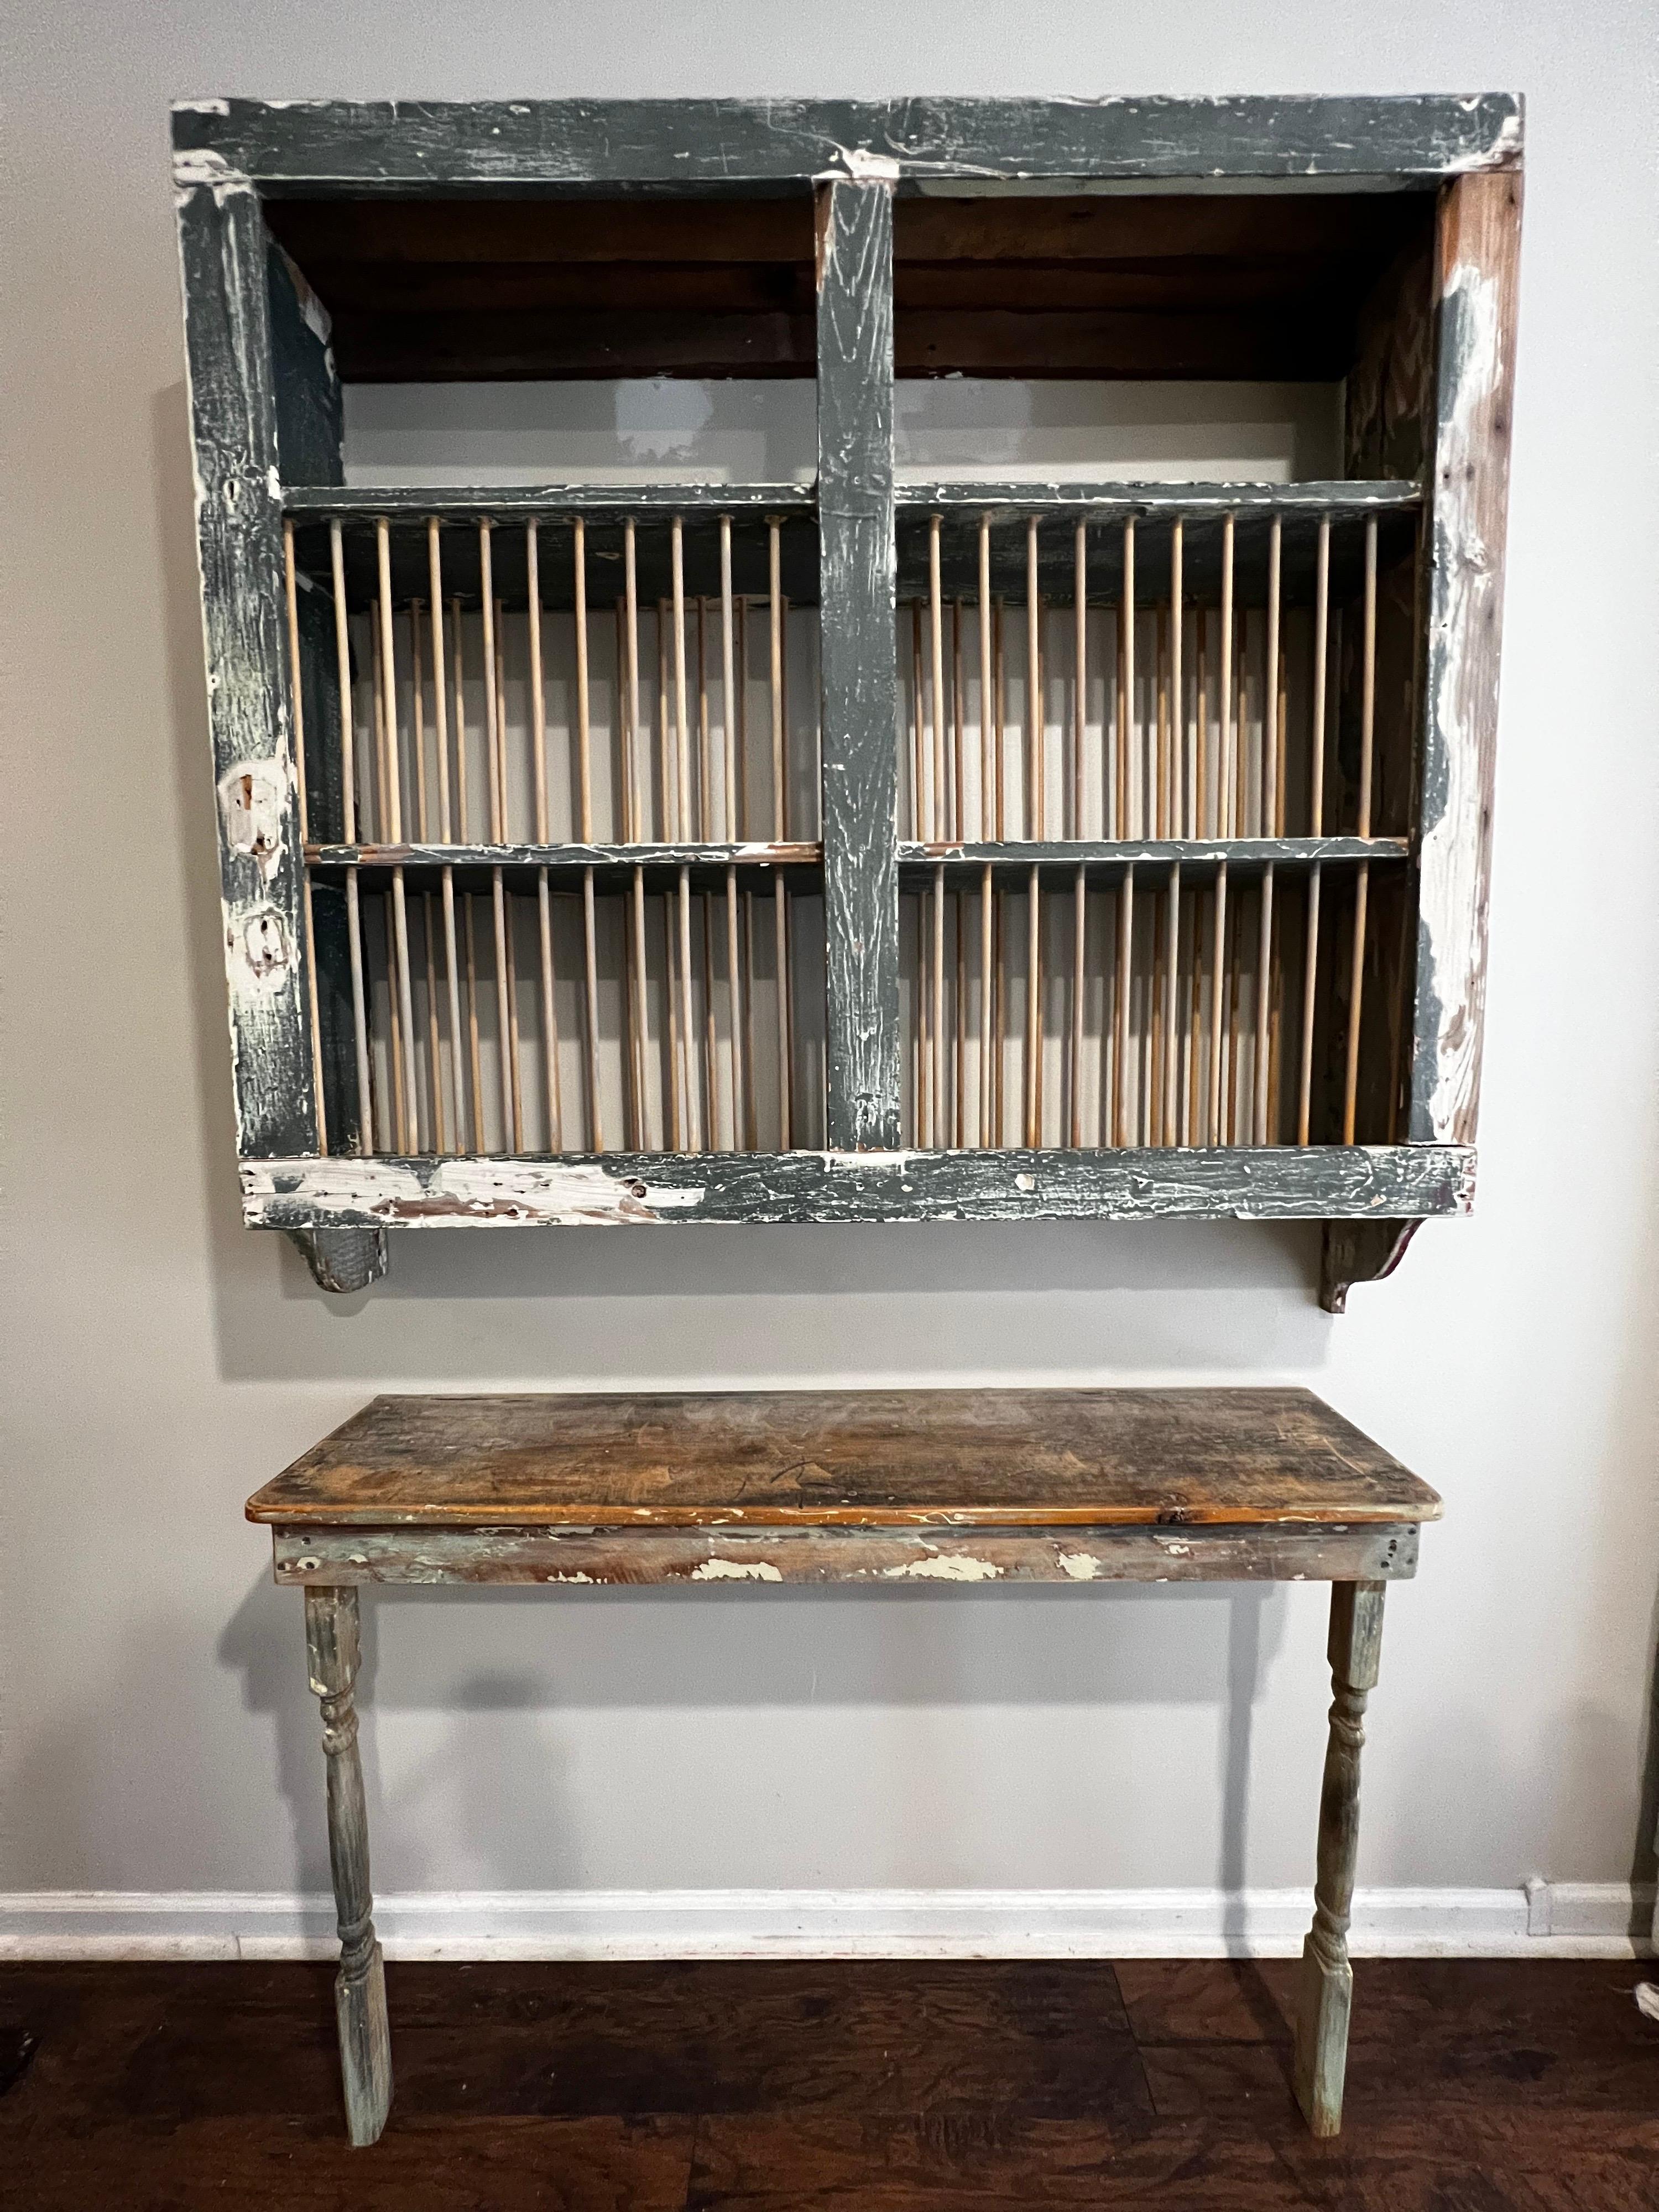 Here is a gorgeous unique Late 18th / Early 19th Century dish drying rack with lower table. Can be separated into two pieces or set up as one solid piece. 

Display your beautiful china collection with easy access to wash/dry. Top shelf and lower